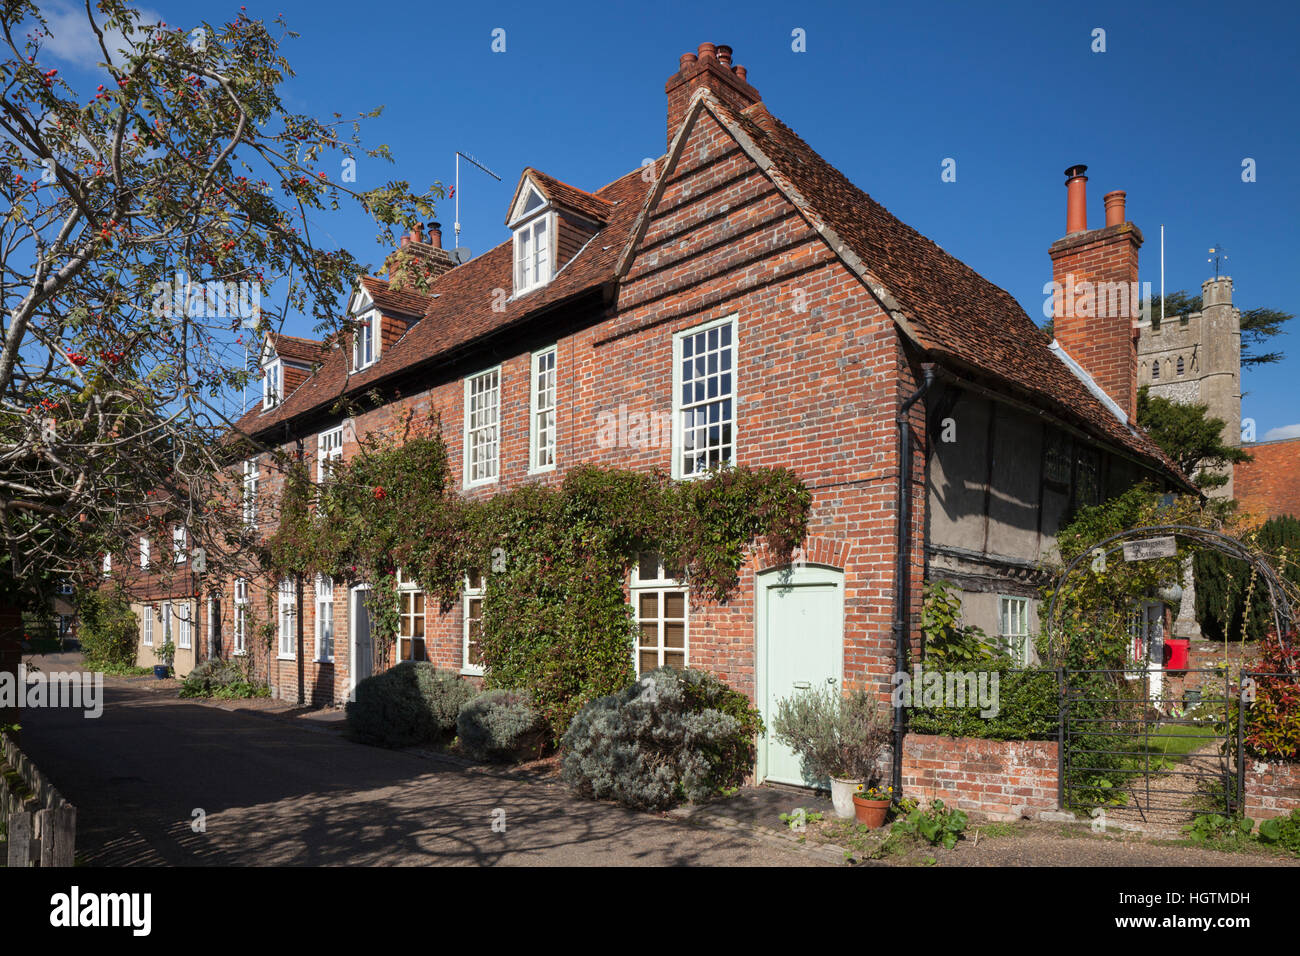 A row of cottages and the church of St Mary the Virgin in the Chiltern Hills village of Hambleden, Hambleden Valley, Buckinghamshire, England, UK Stock Photo